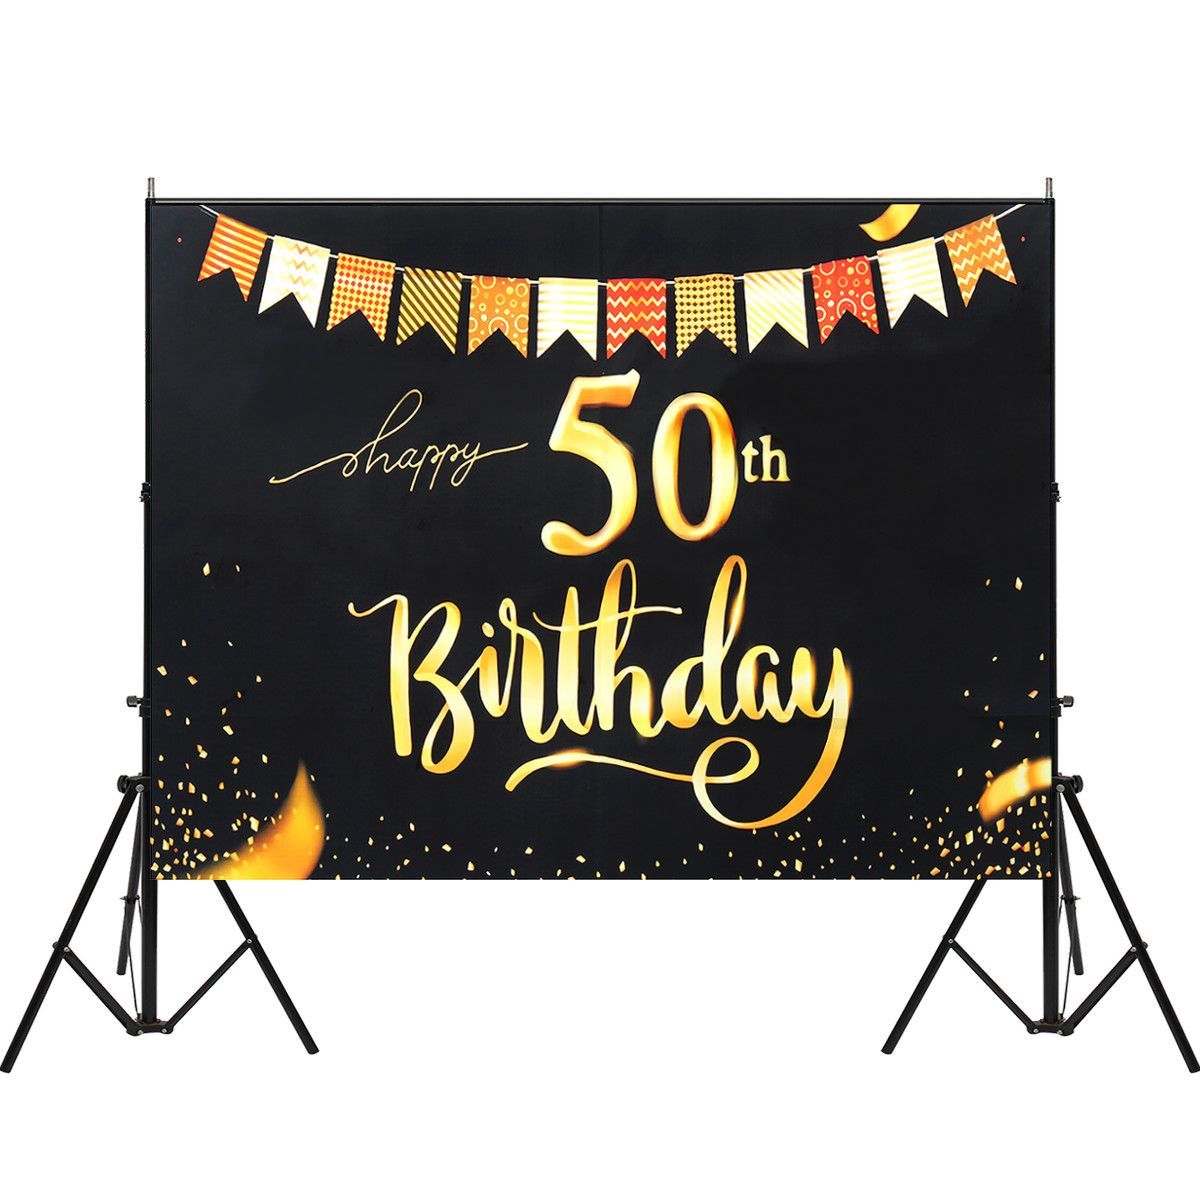 5x7FT-Vinyl-50th-Happy-Birthday-Colorful-Flag-String-Photography-Backdrop-Background-Studio-Prop-1638956